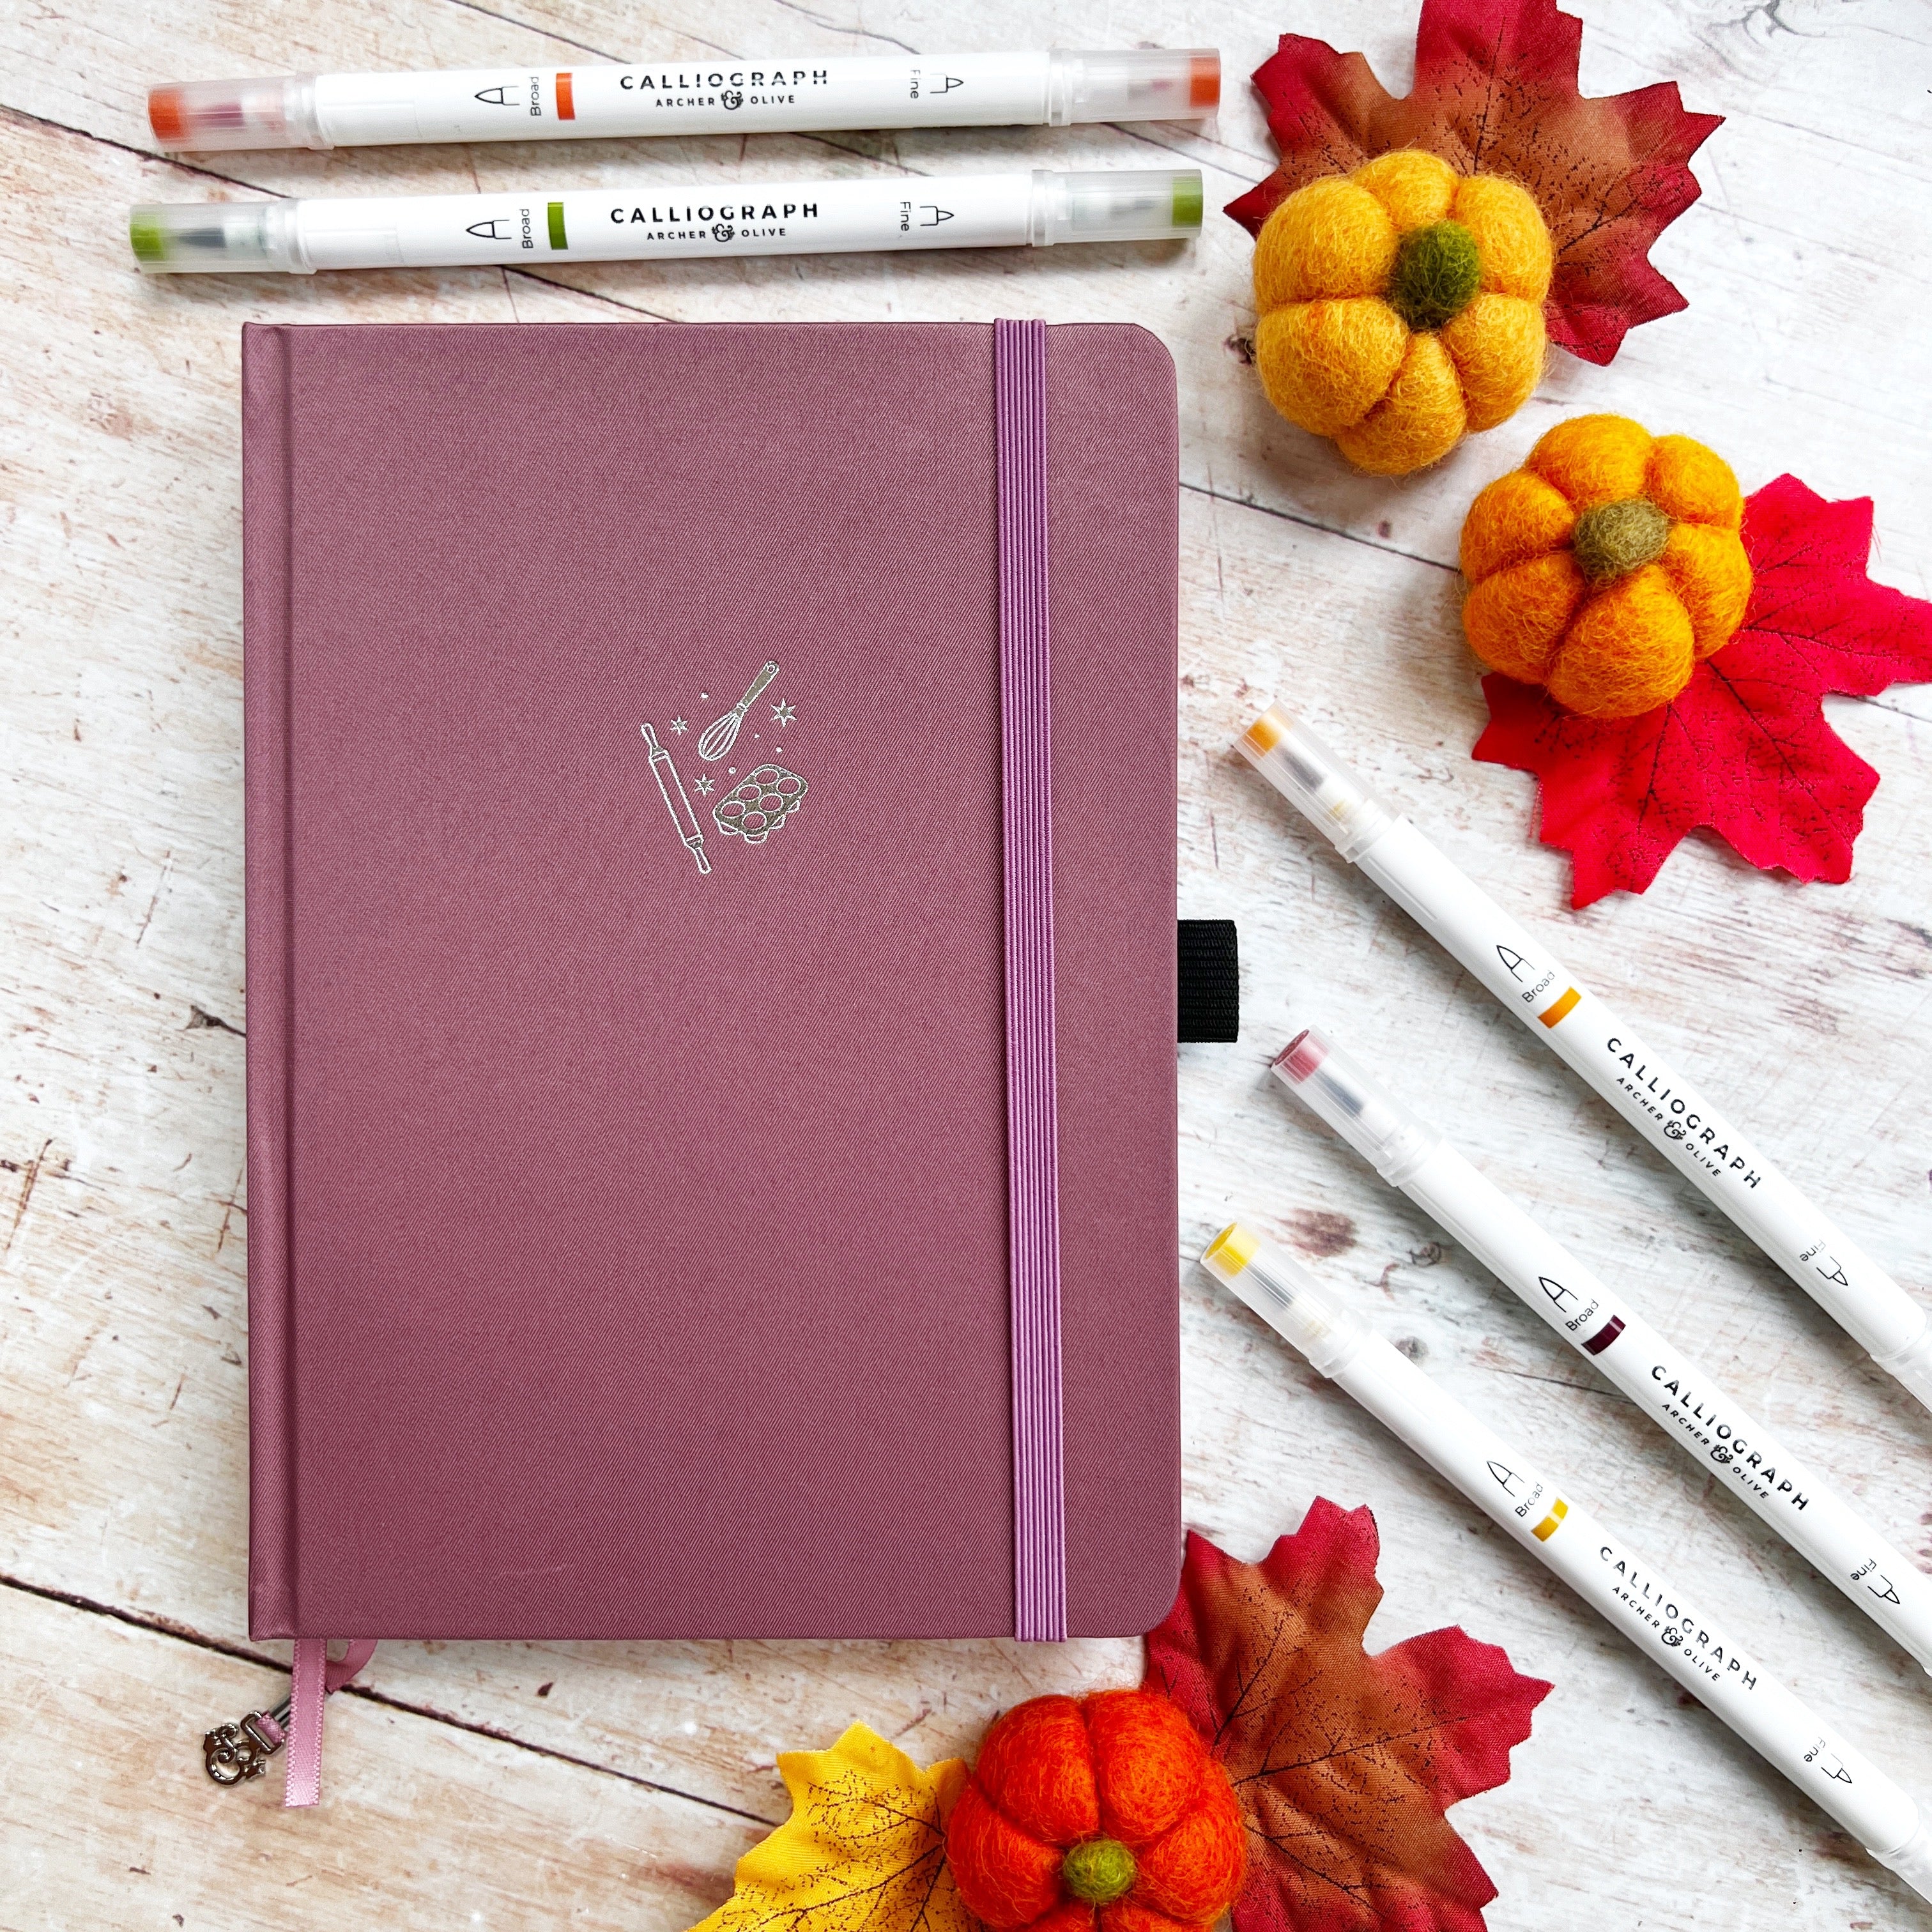 Dusky pink journal with whisk and pens